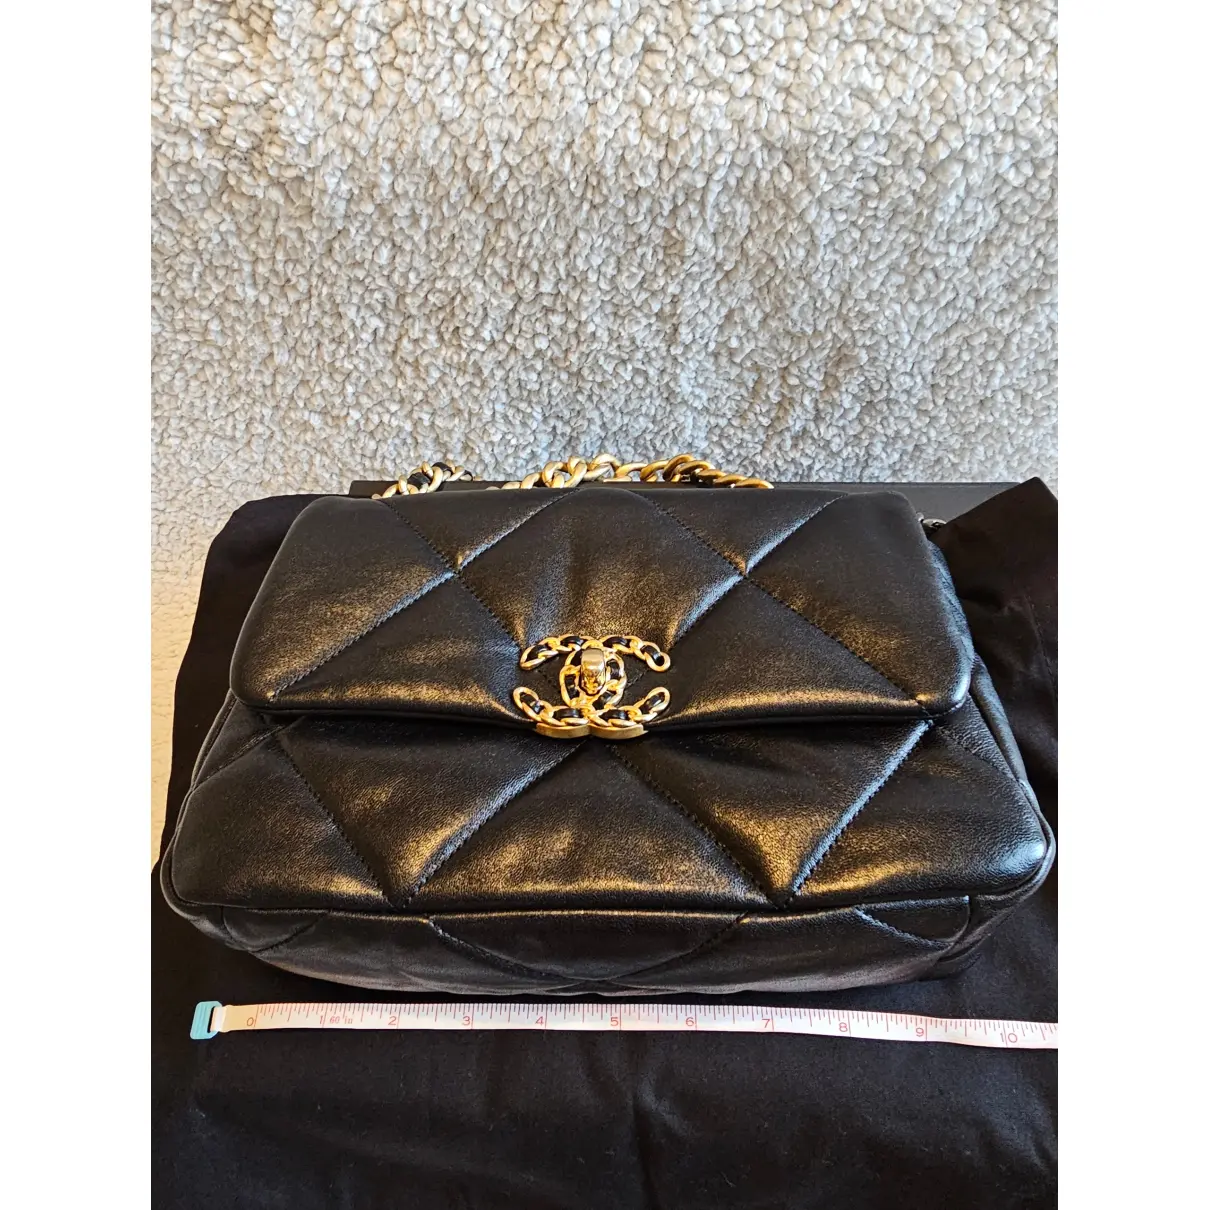 Chanel 19 leather bag Chanel